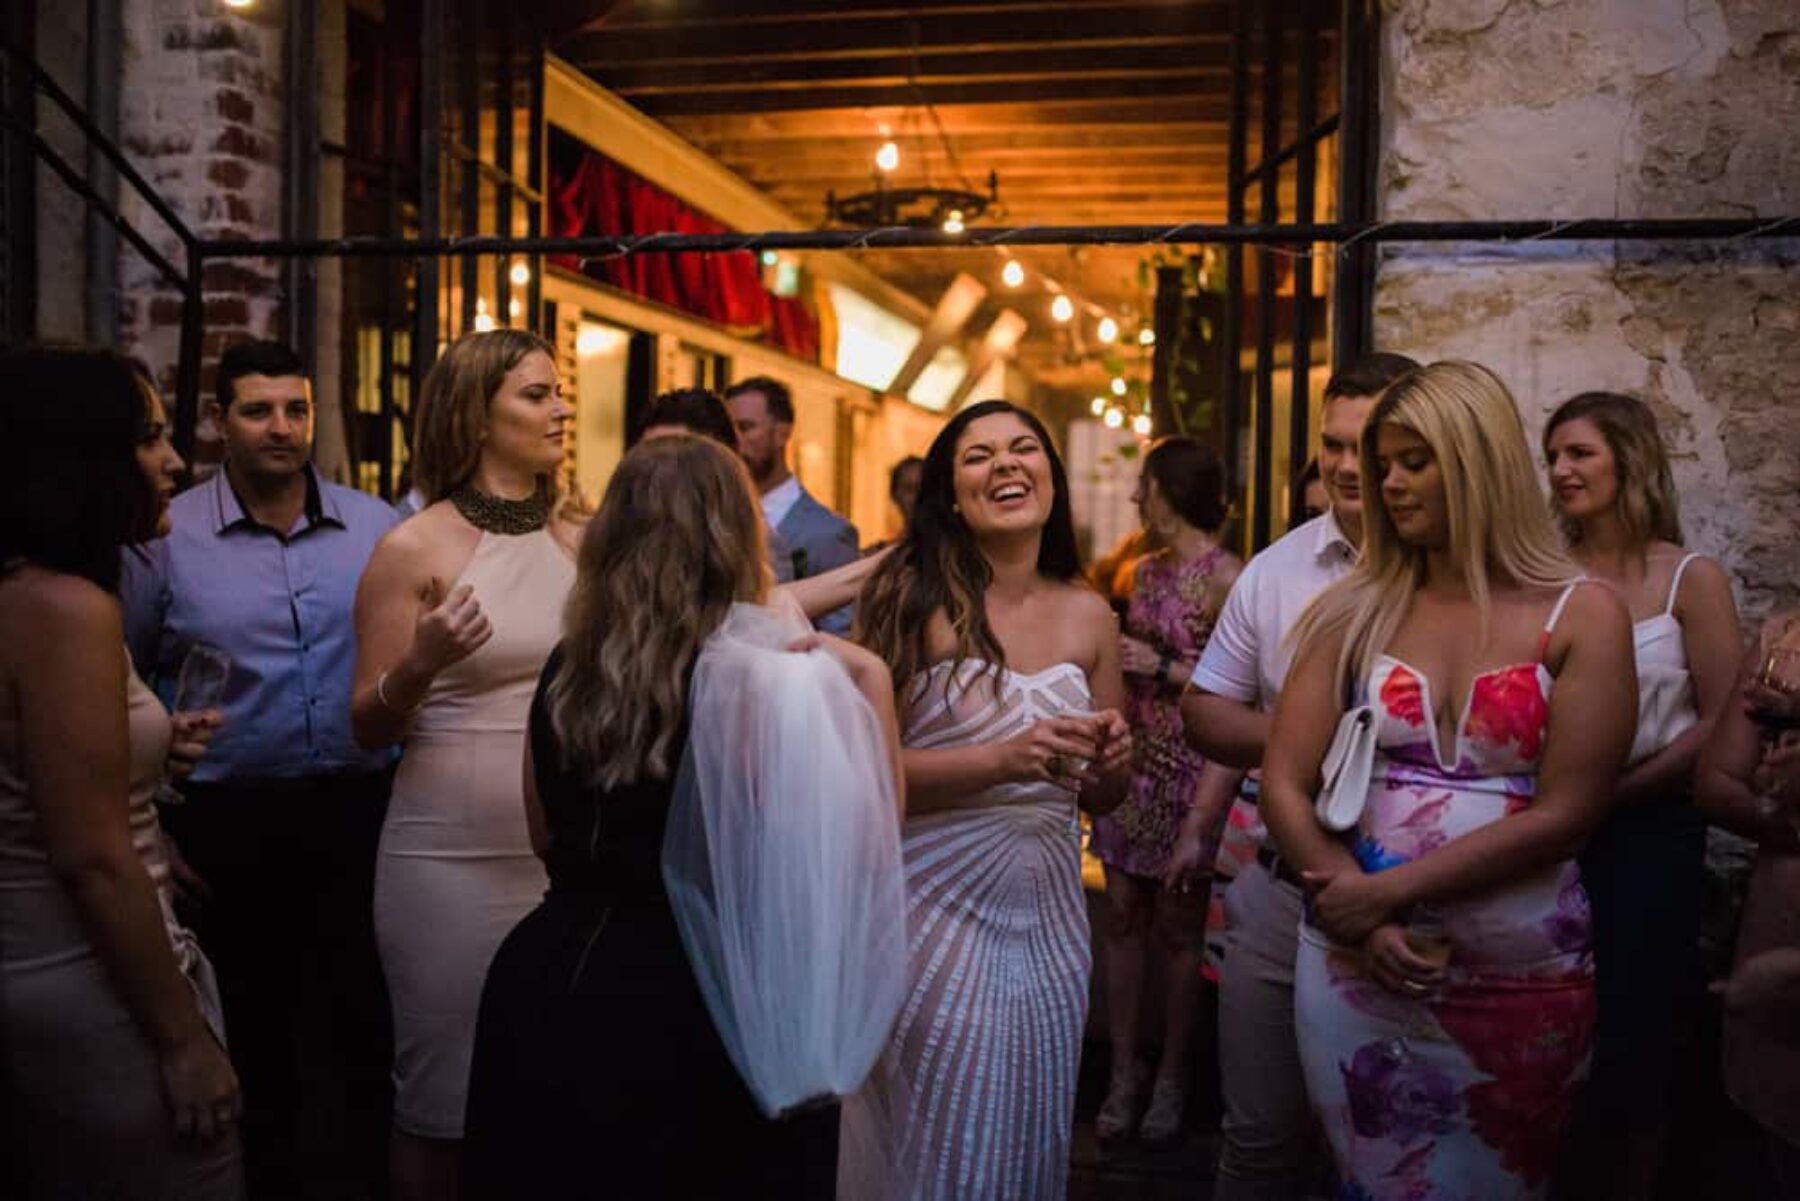 Relaxed Fremantle wedding at Moore & Moore